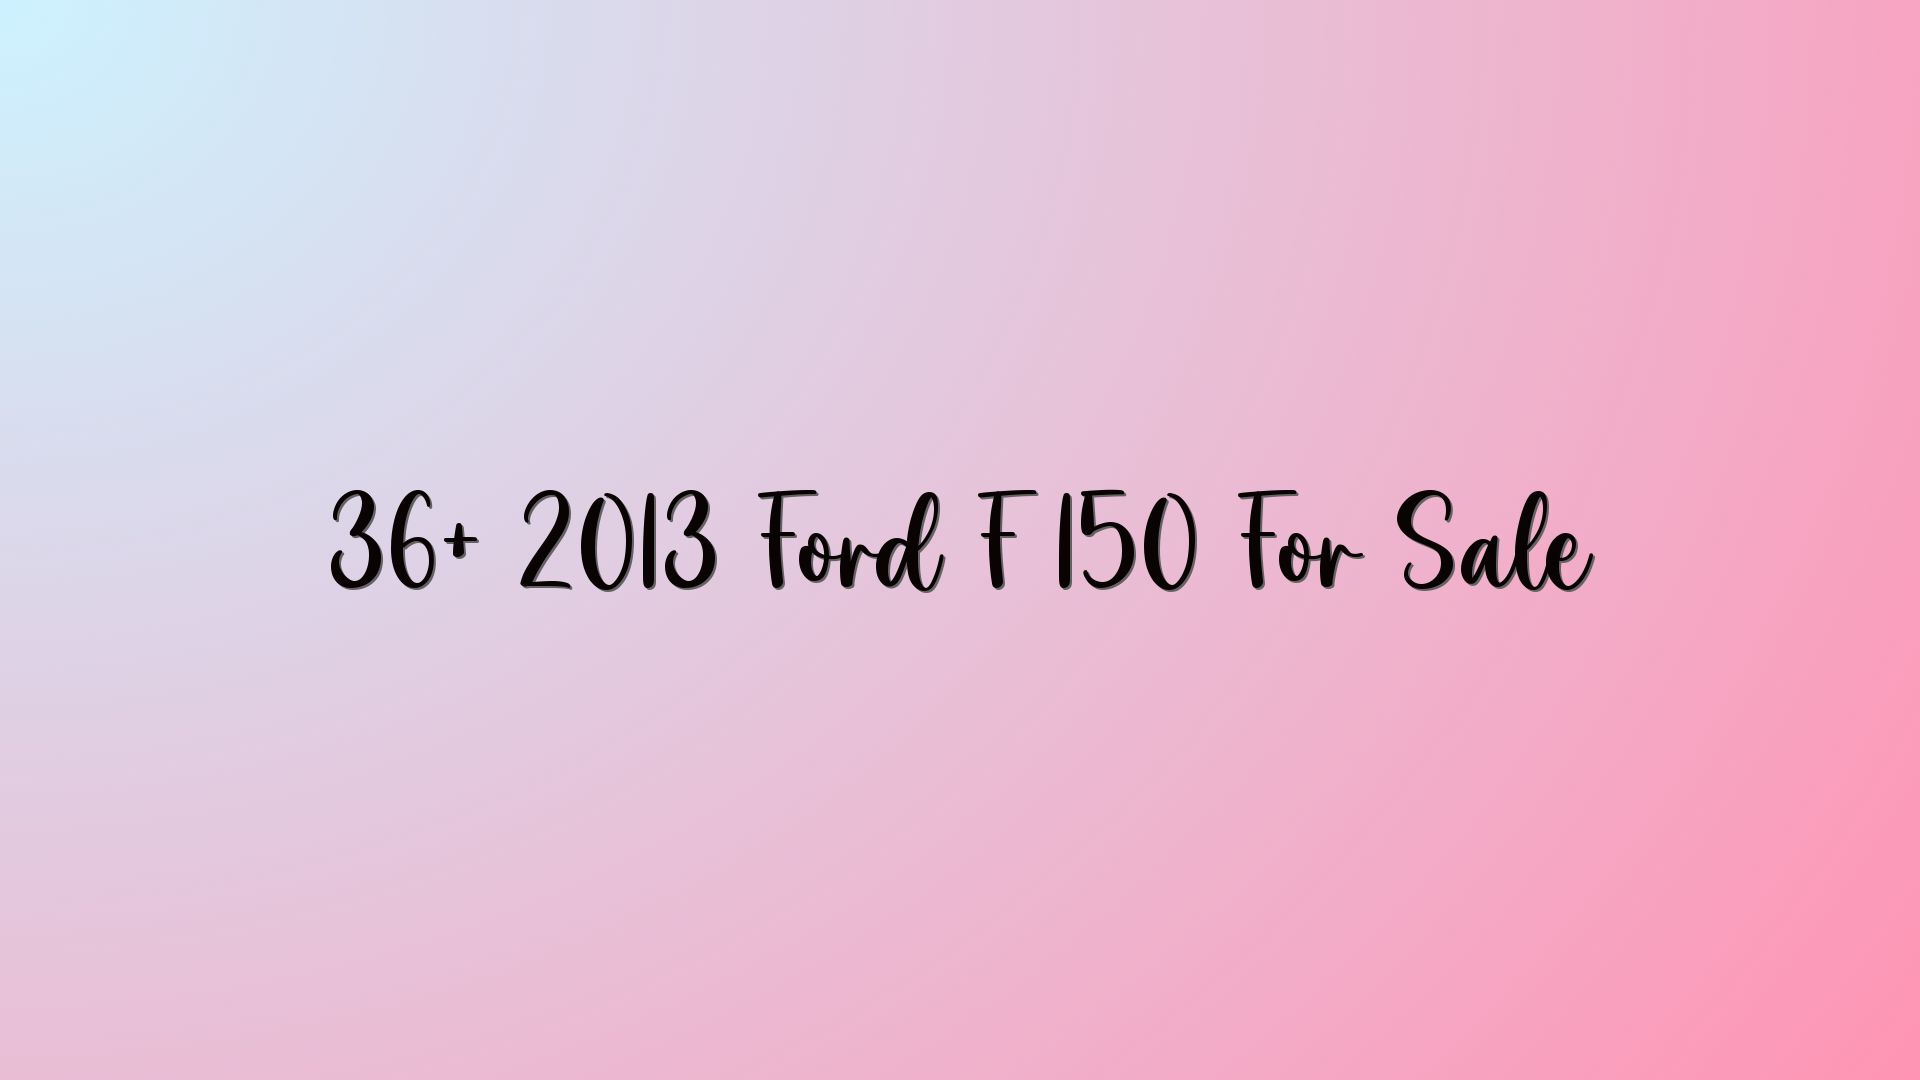 36+ 2013 Ford F 150 For Sale